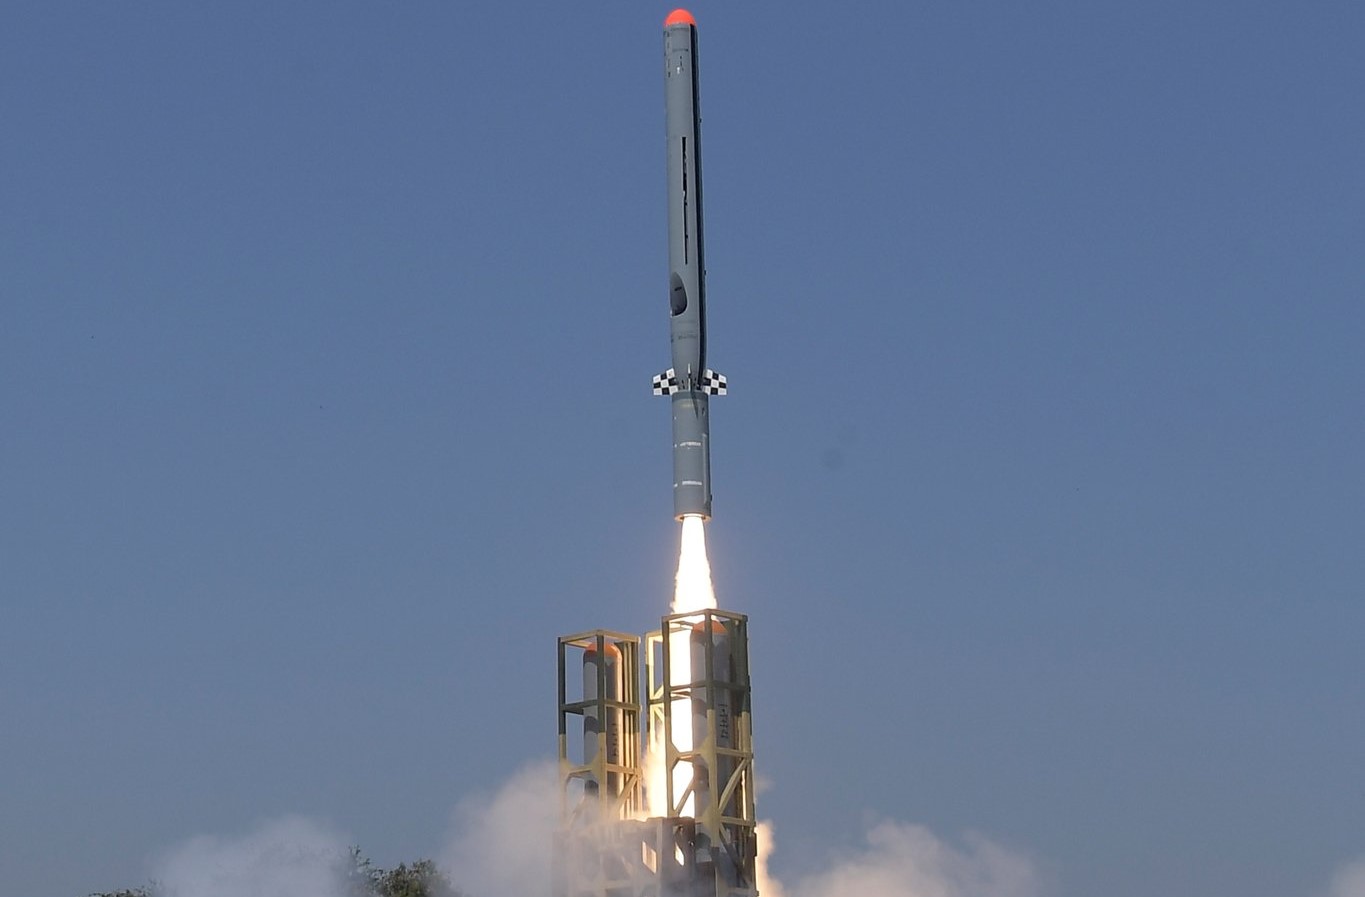 DRDO successfully tests Nirbhay ITCM (Indigenous Tech Cruise Missile) from ITR Chandipur, off the coast of Odisha.